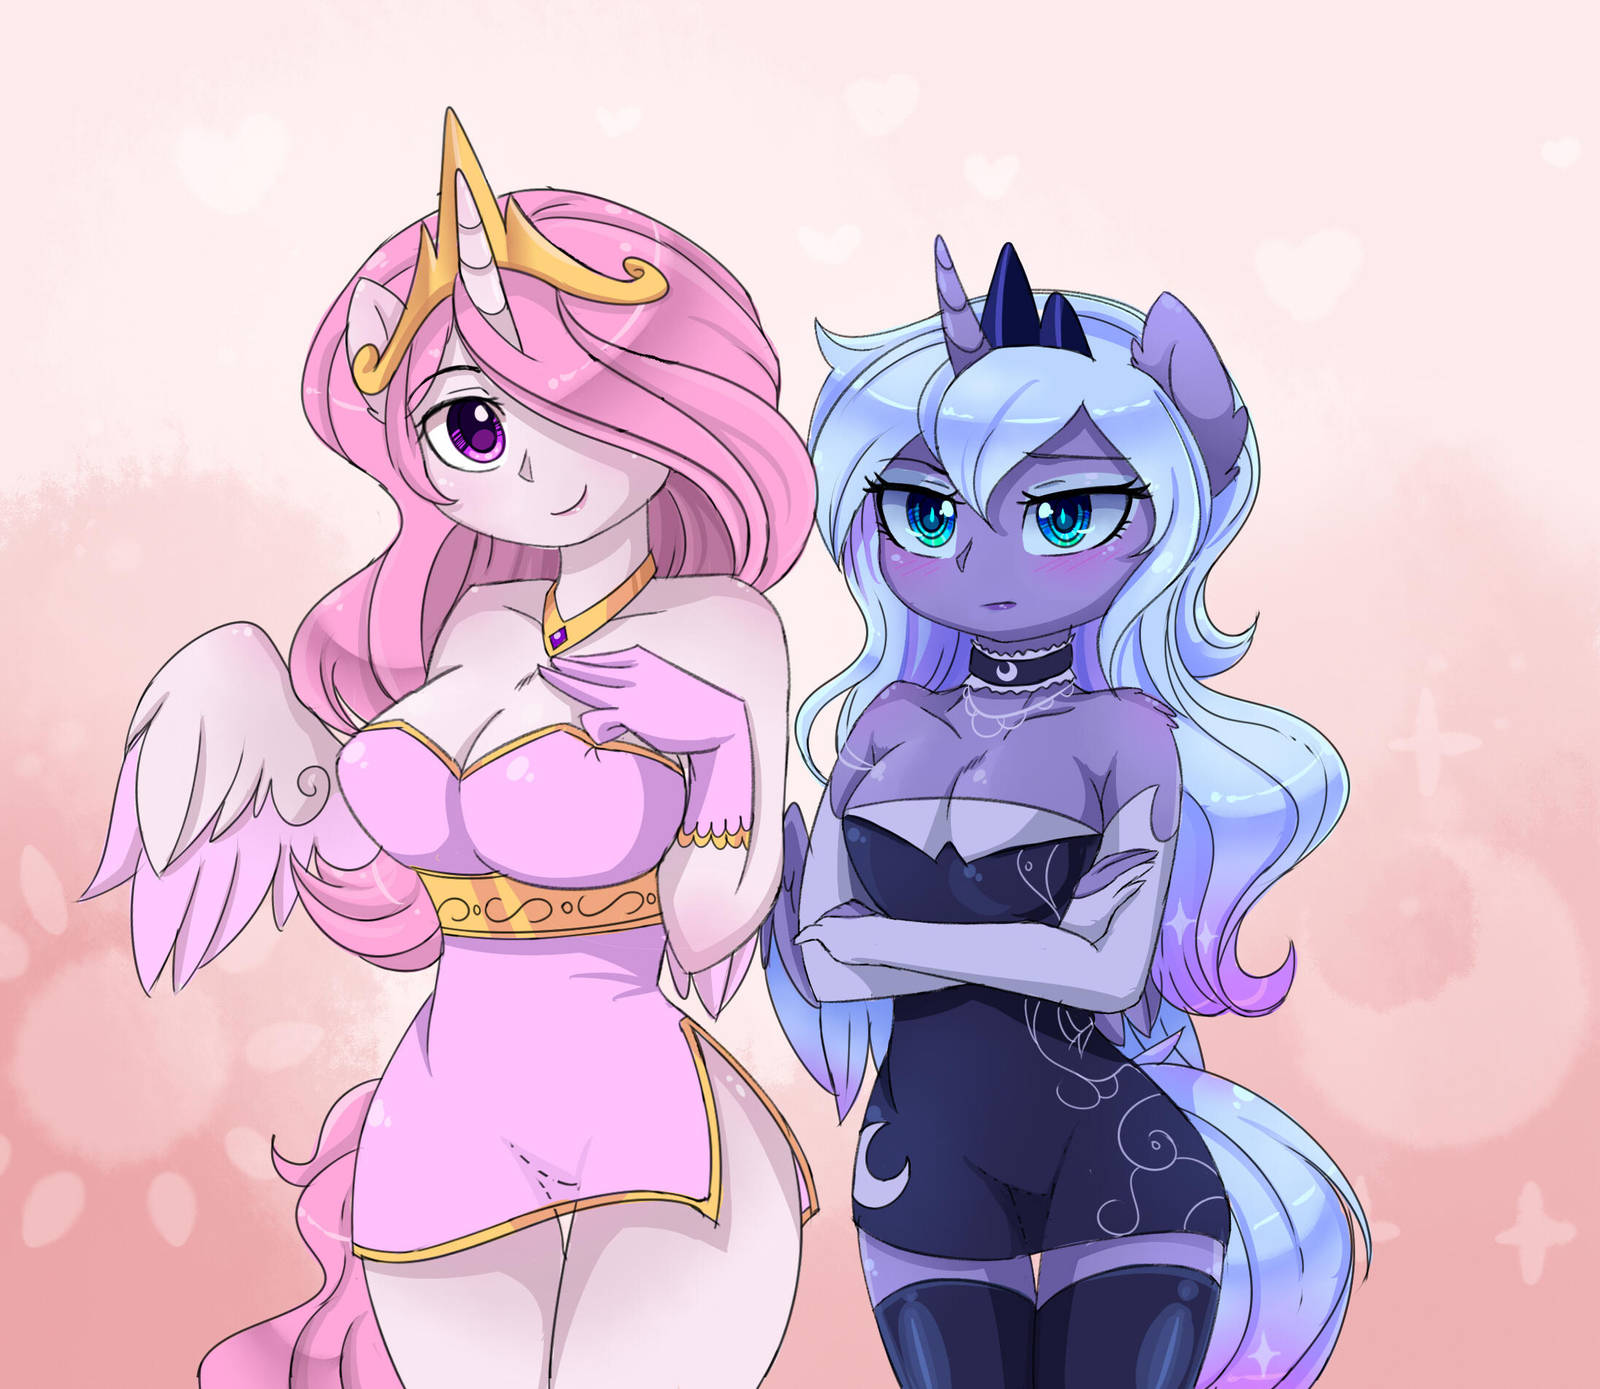 Tia and woona by MagnaLuna on DeviantArt